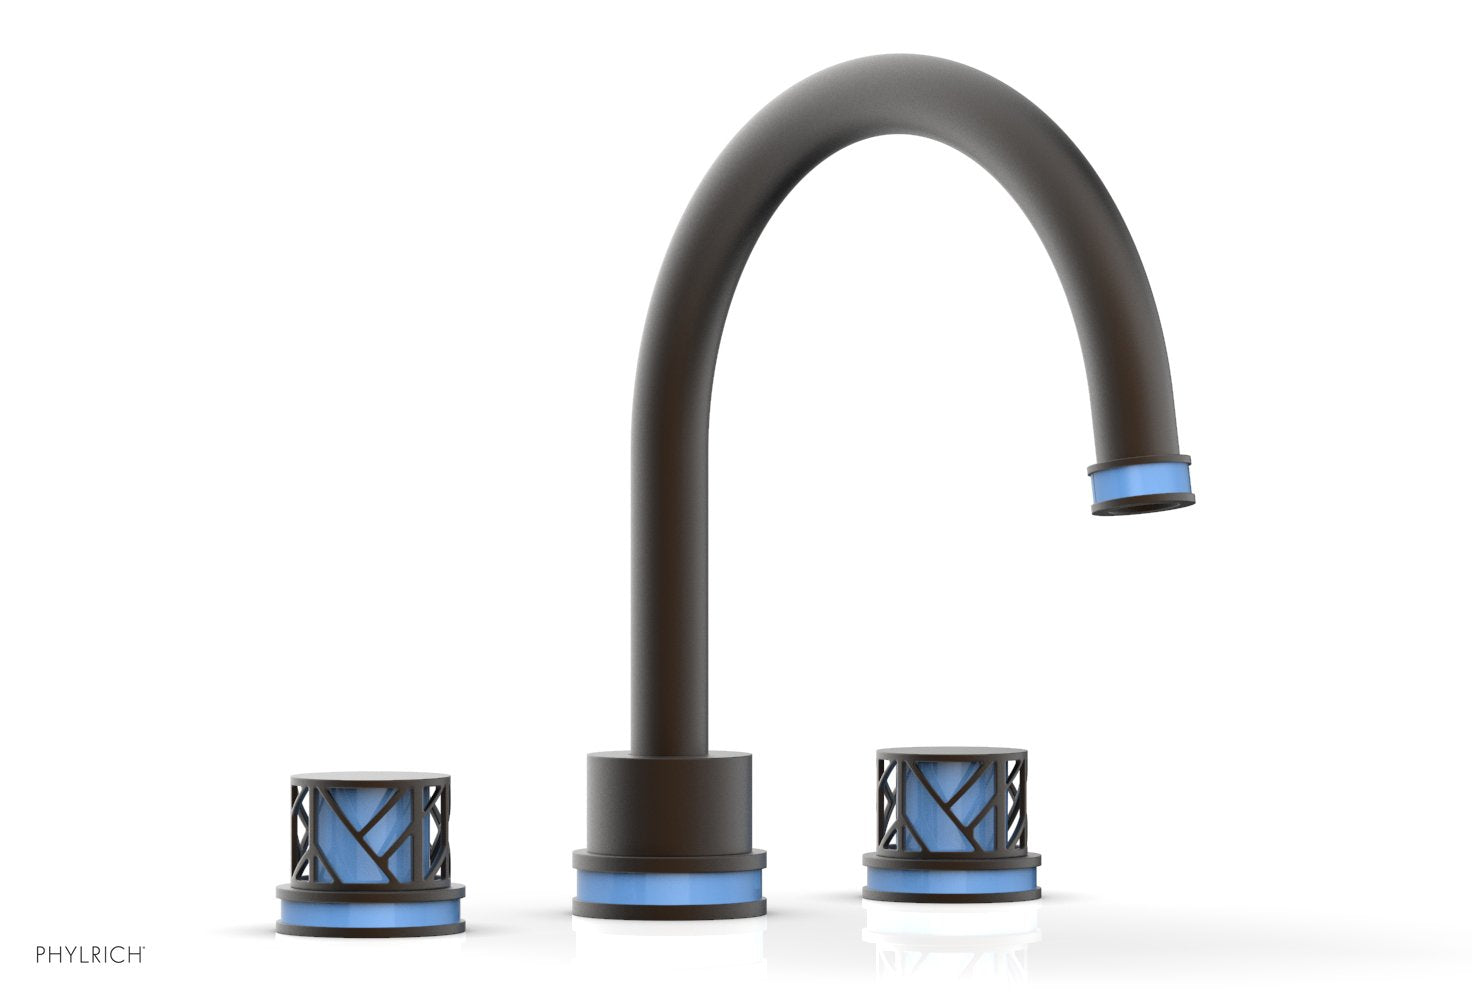 Phylrich JOLIE Deck Tub Set - Round Handles with "Light Blue" Accents